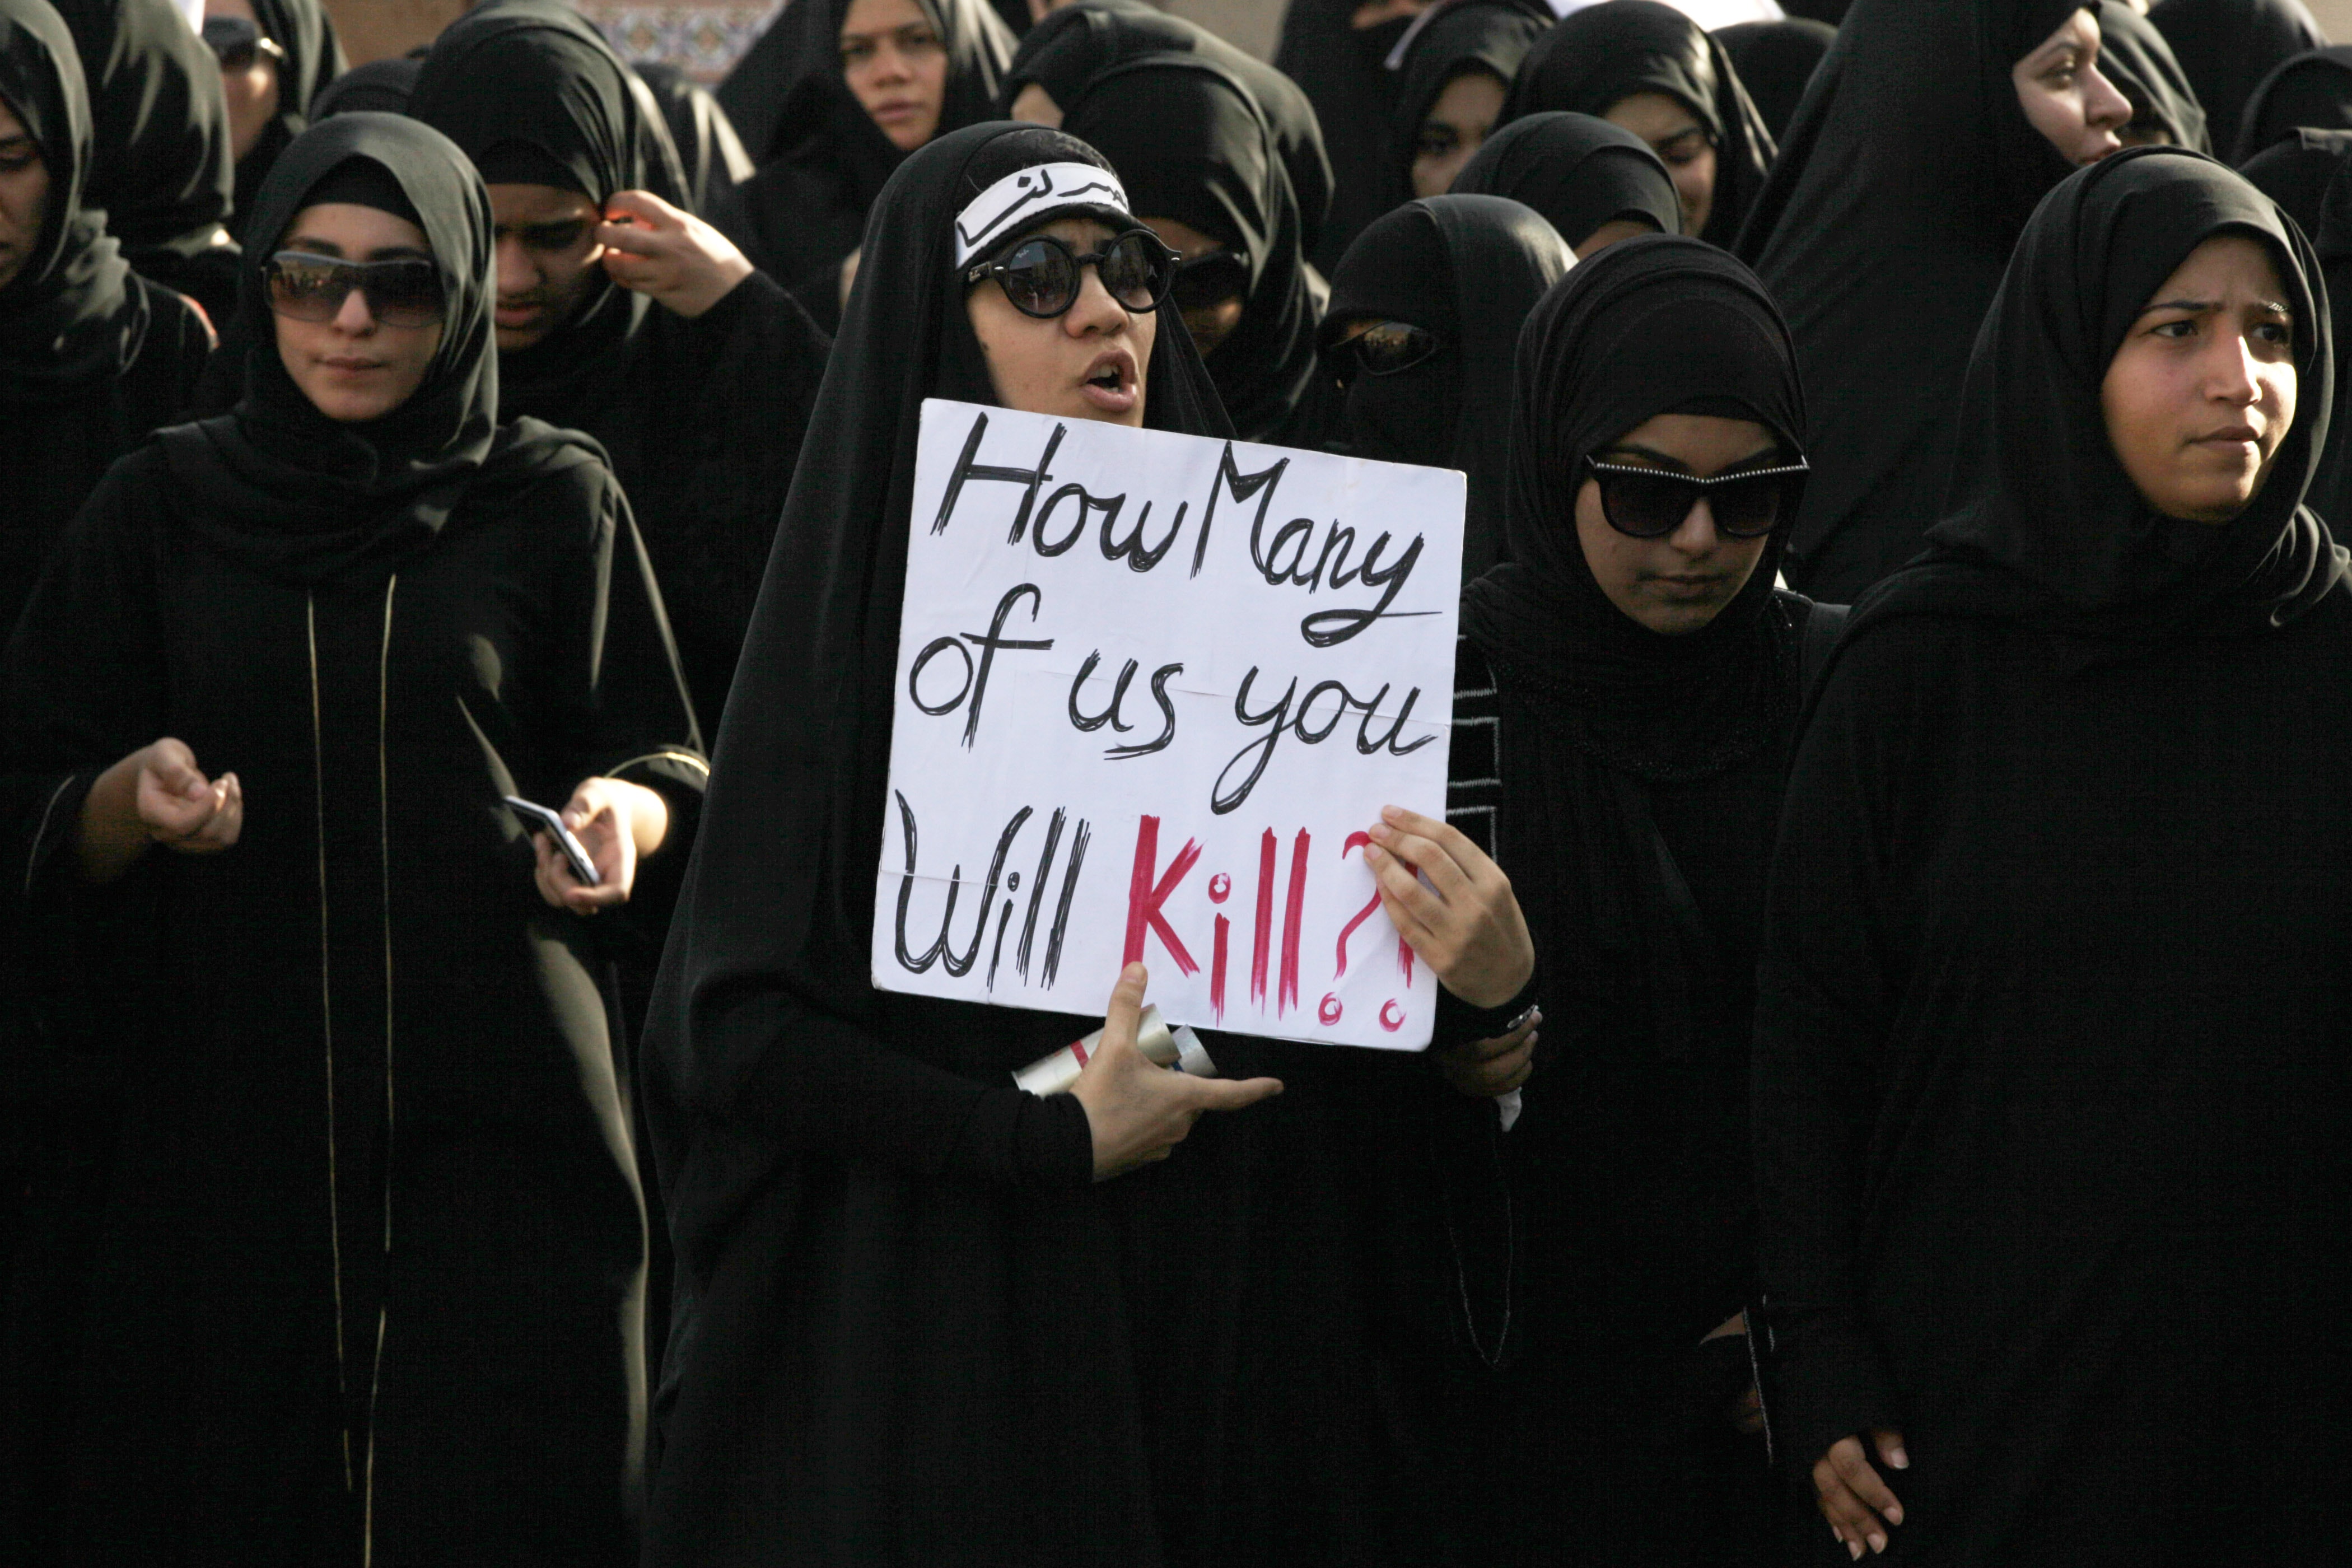 Bahraini mourners carry signs and chant anti-government slogans during the funeral for a protester in Sanabis in the suburbs of the capital of Manama, Bahrain, Sunday, July 6, 2014., AP Photo/Hasan Jamali